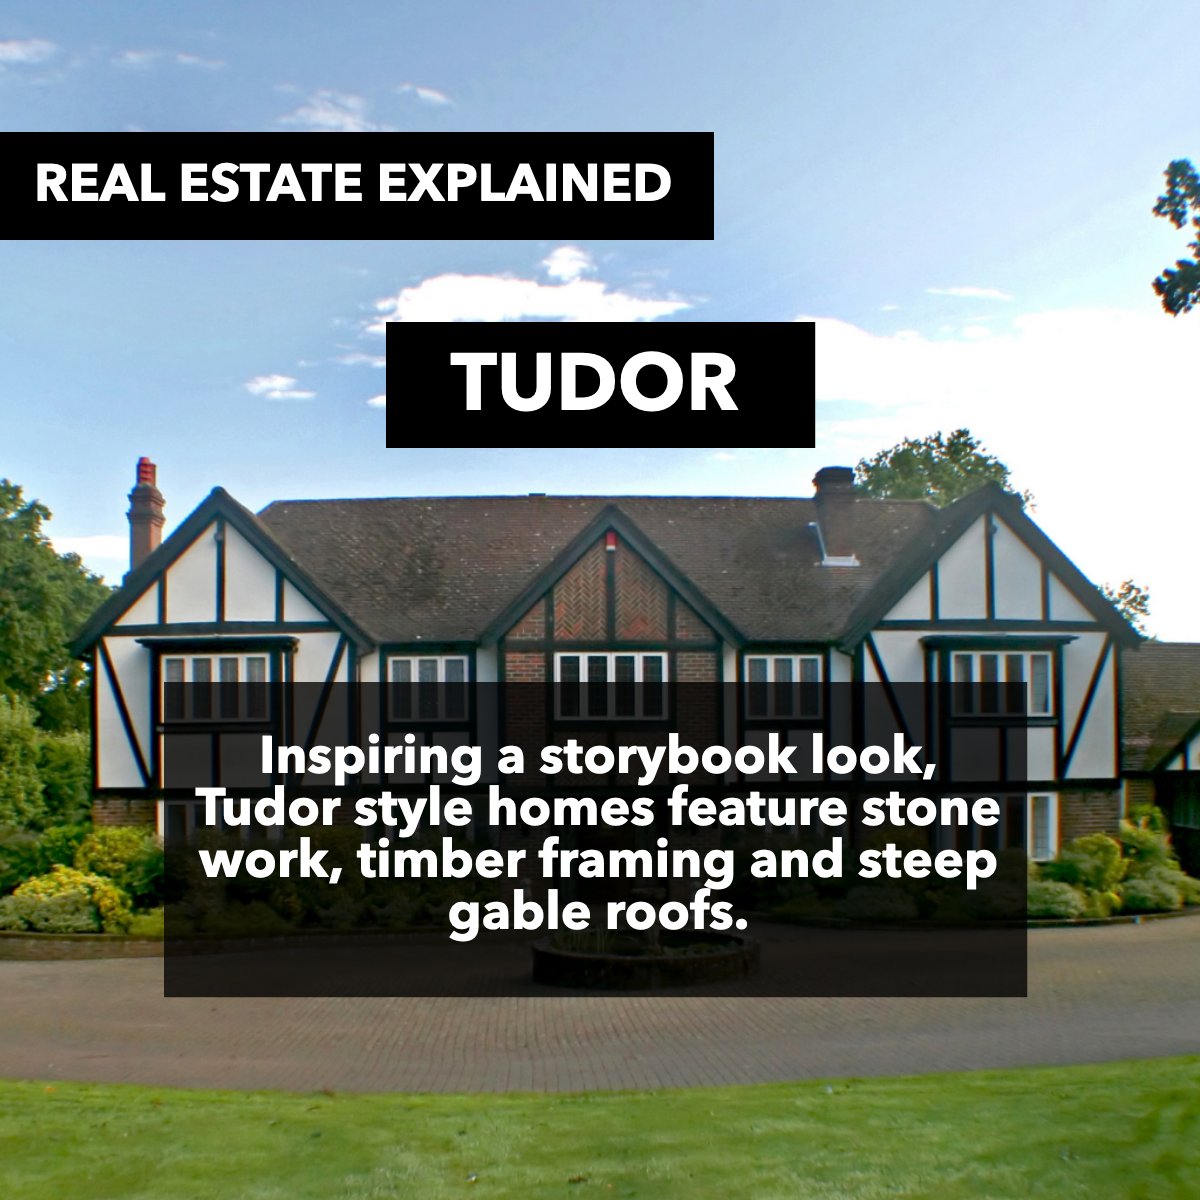 Charming, intricate, and classic, Tudor-style homes have been an iconic home style in North America since the 19th century. 🏘️

#tudorstylearchitecture #tudorstylehome #styletudors
#realestate #realtor #niagara #oakville #halton #stcatharines